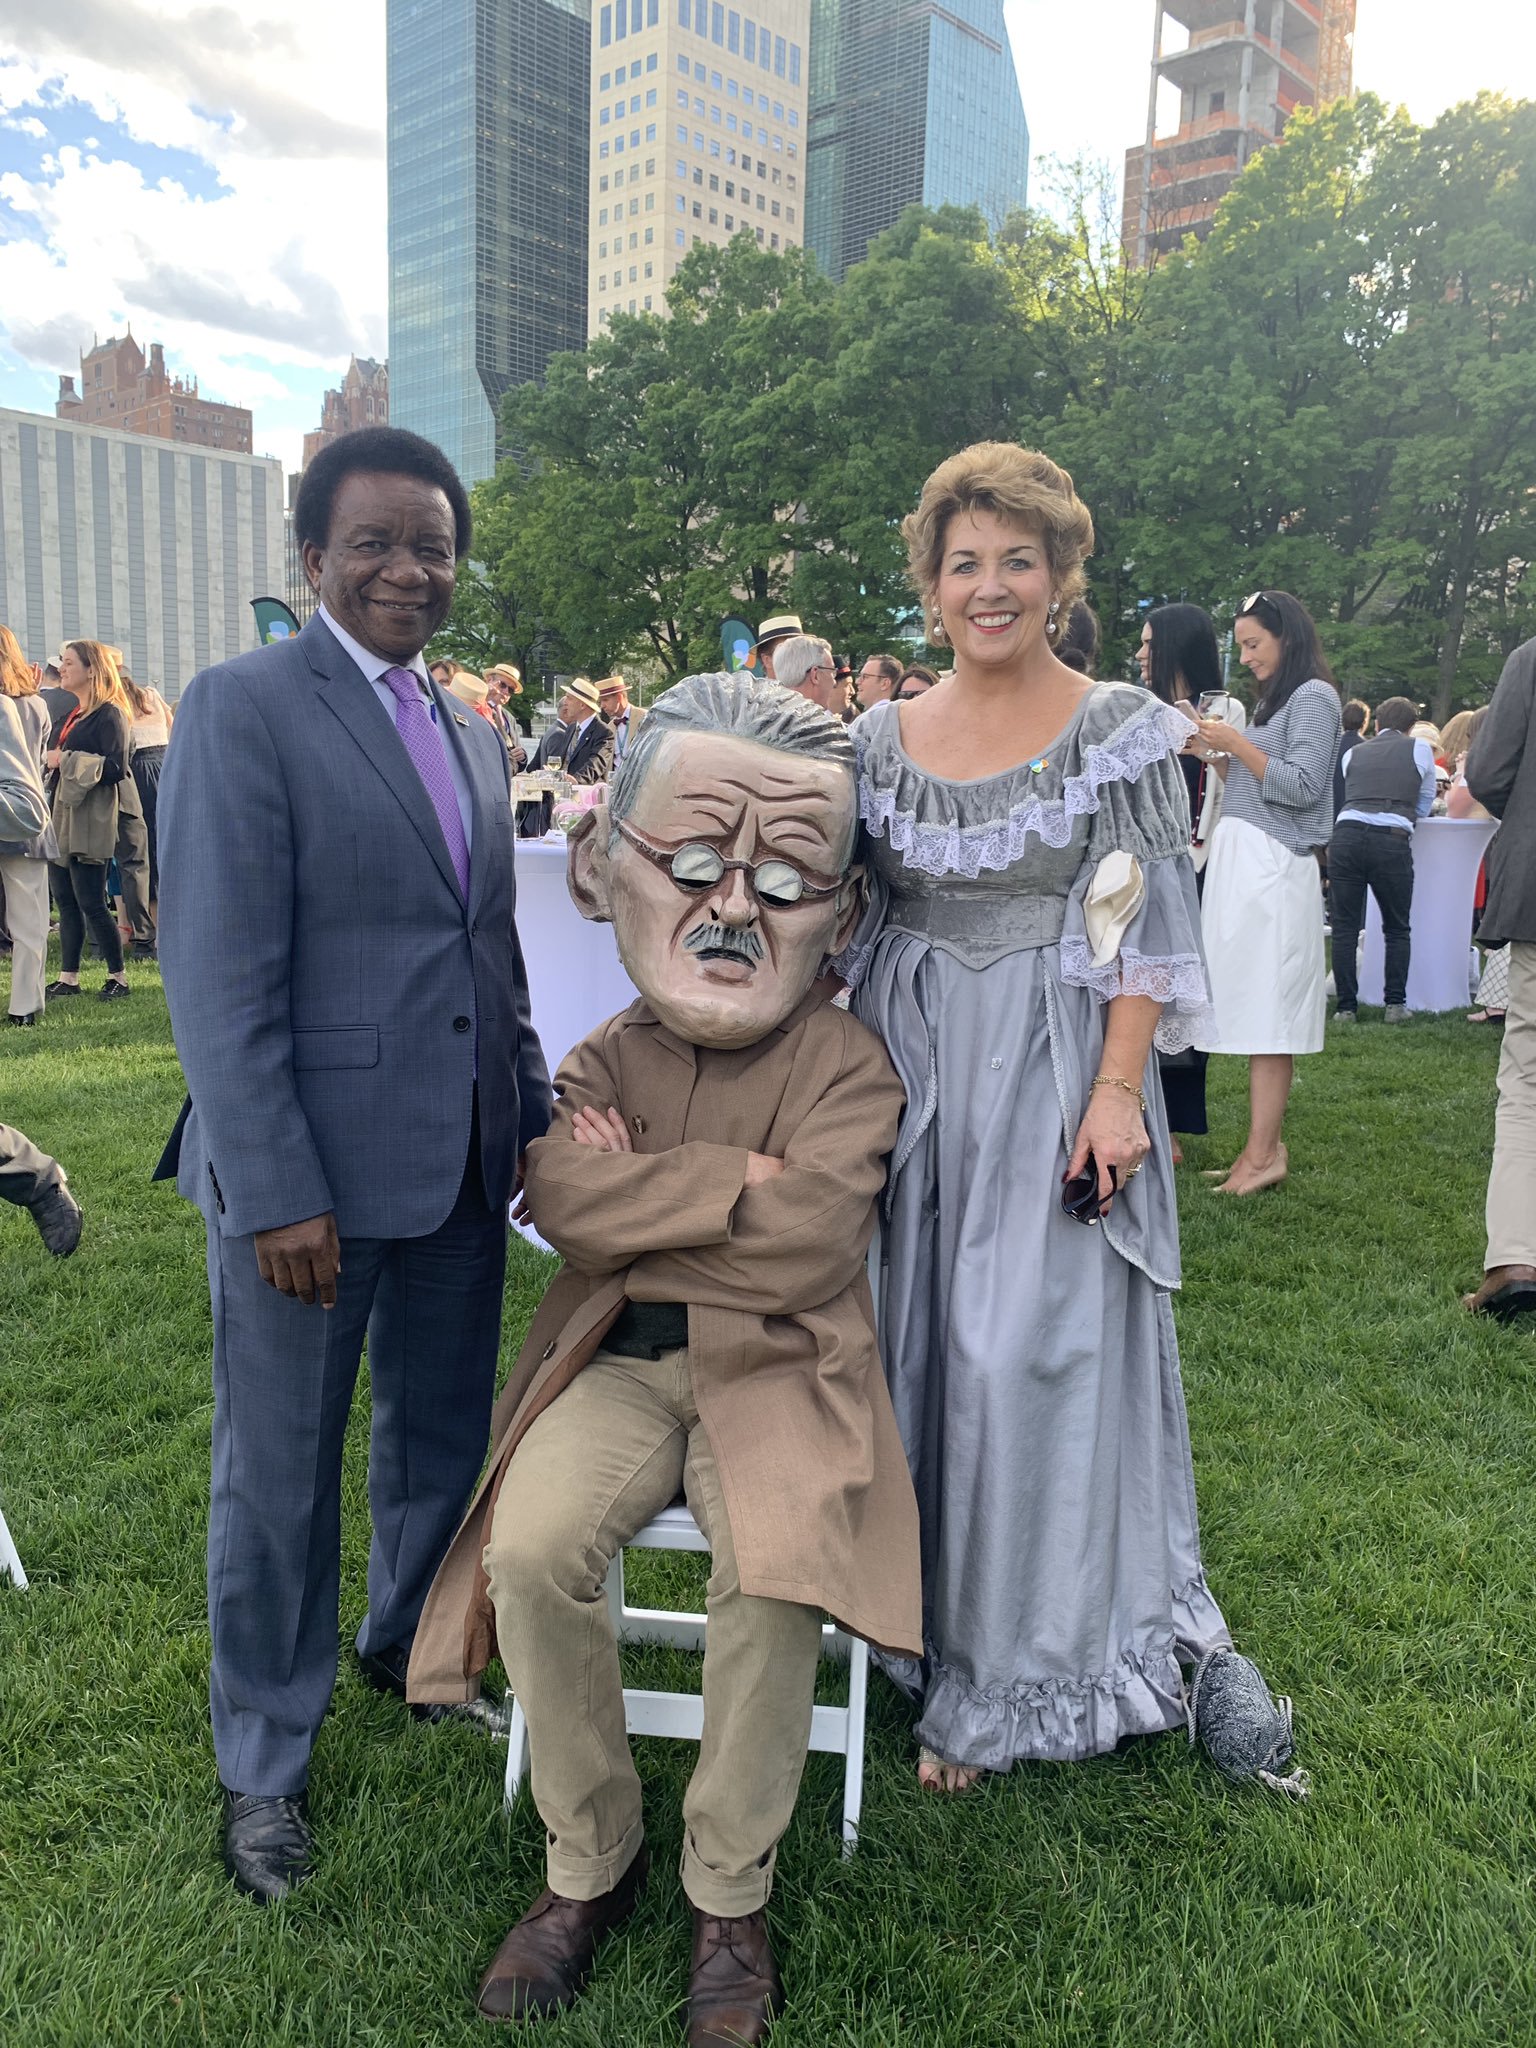 Ambassador Geraldine Byrne Nason takes part in the first Bloomsday festival to be held at the United Nations in New York